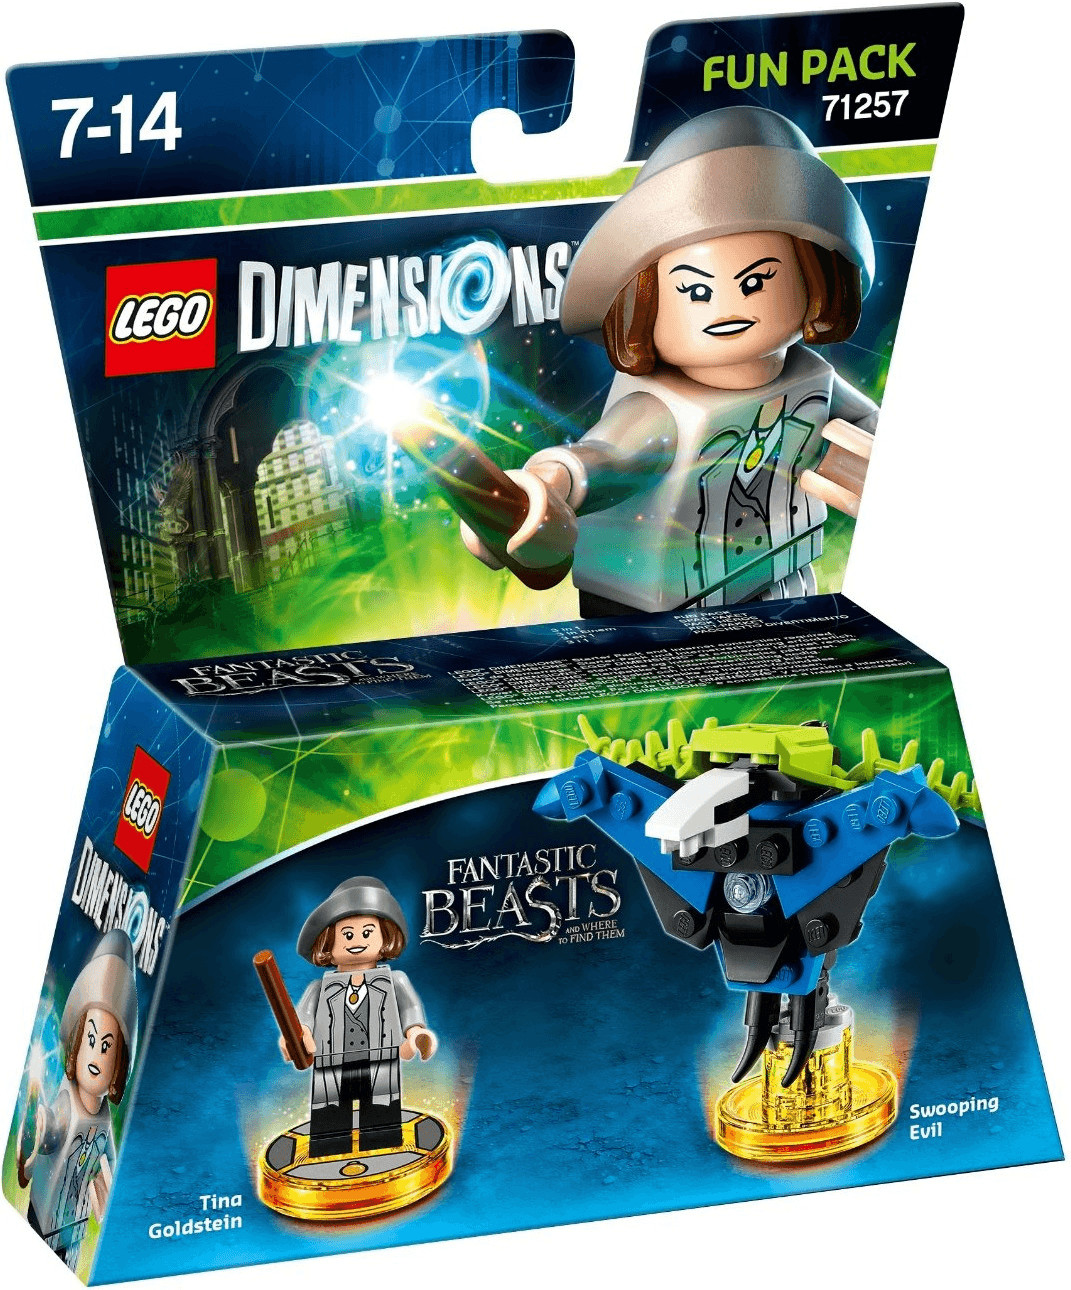 LEGO Dimensions: Fun Pack - Fantastic Beasts and Where to Find Them